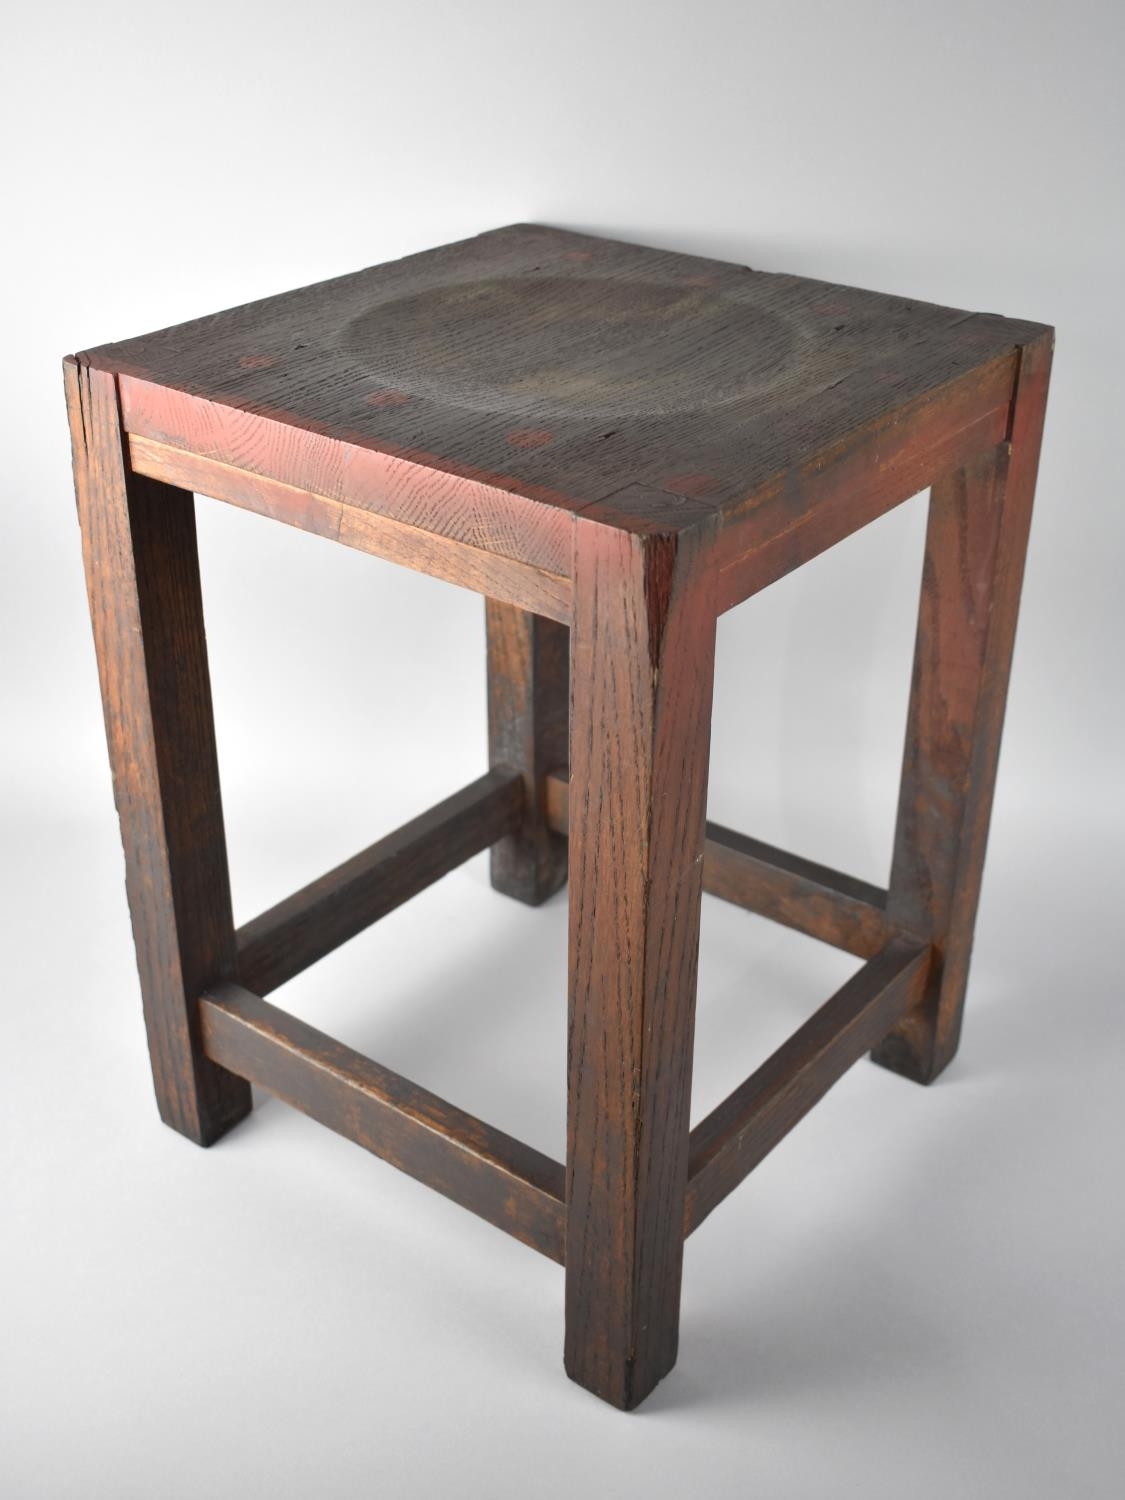 A Mid 20th Century Square Topped Stool, 34cms and 46cms High